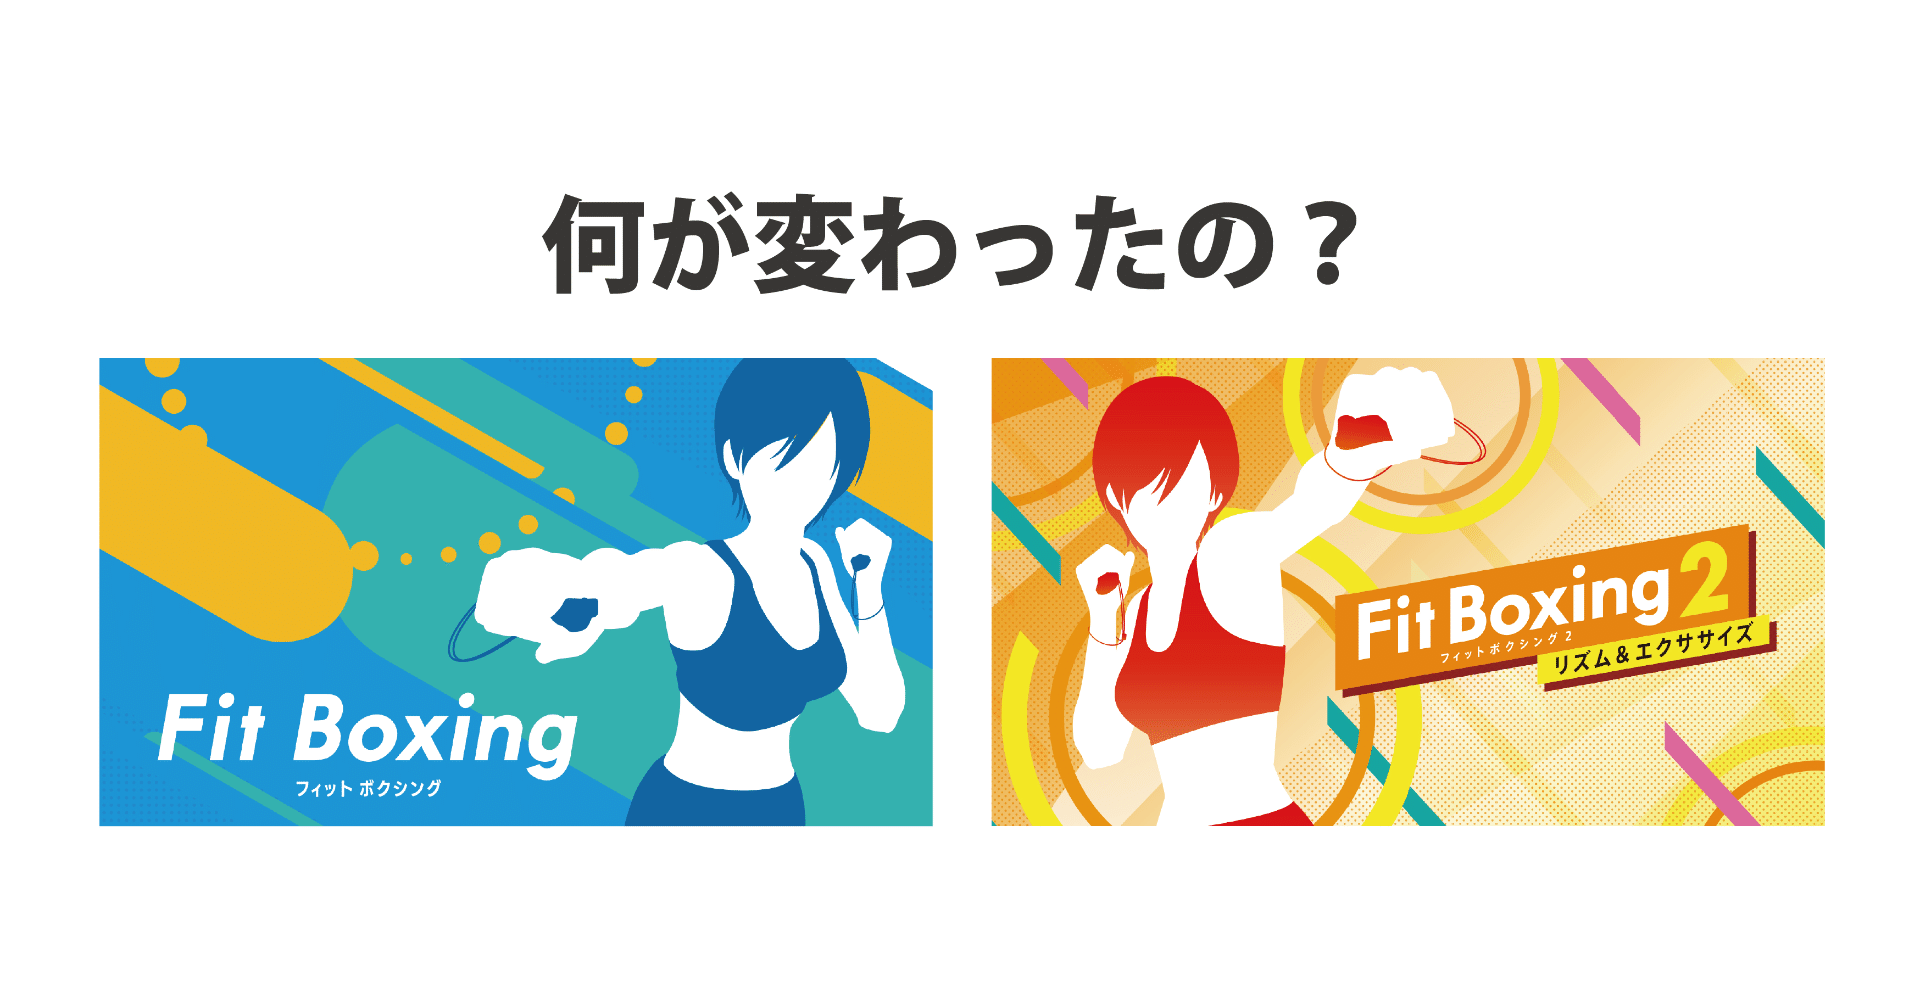 Fit Boxing2 NintendoSwitchソフト